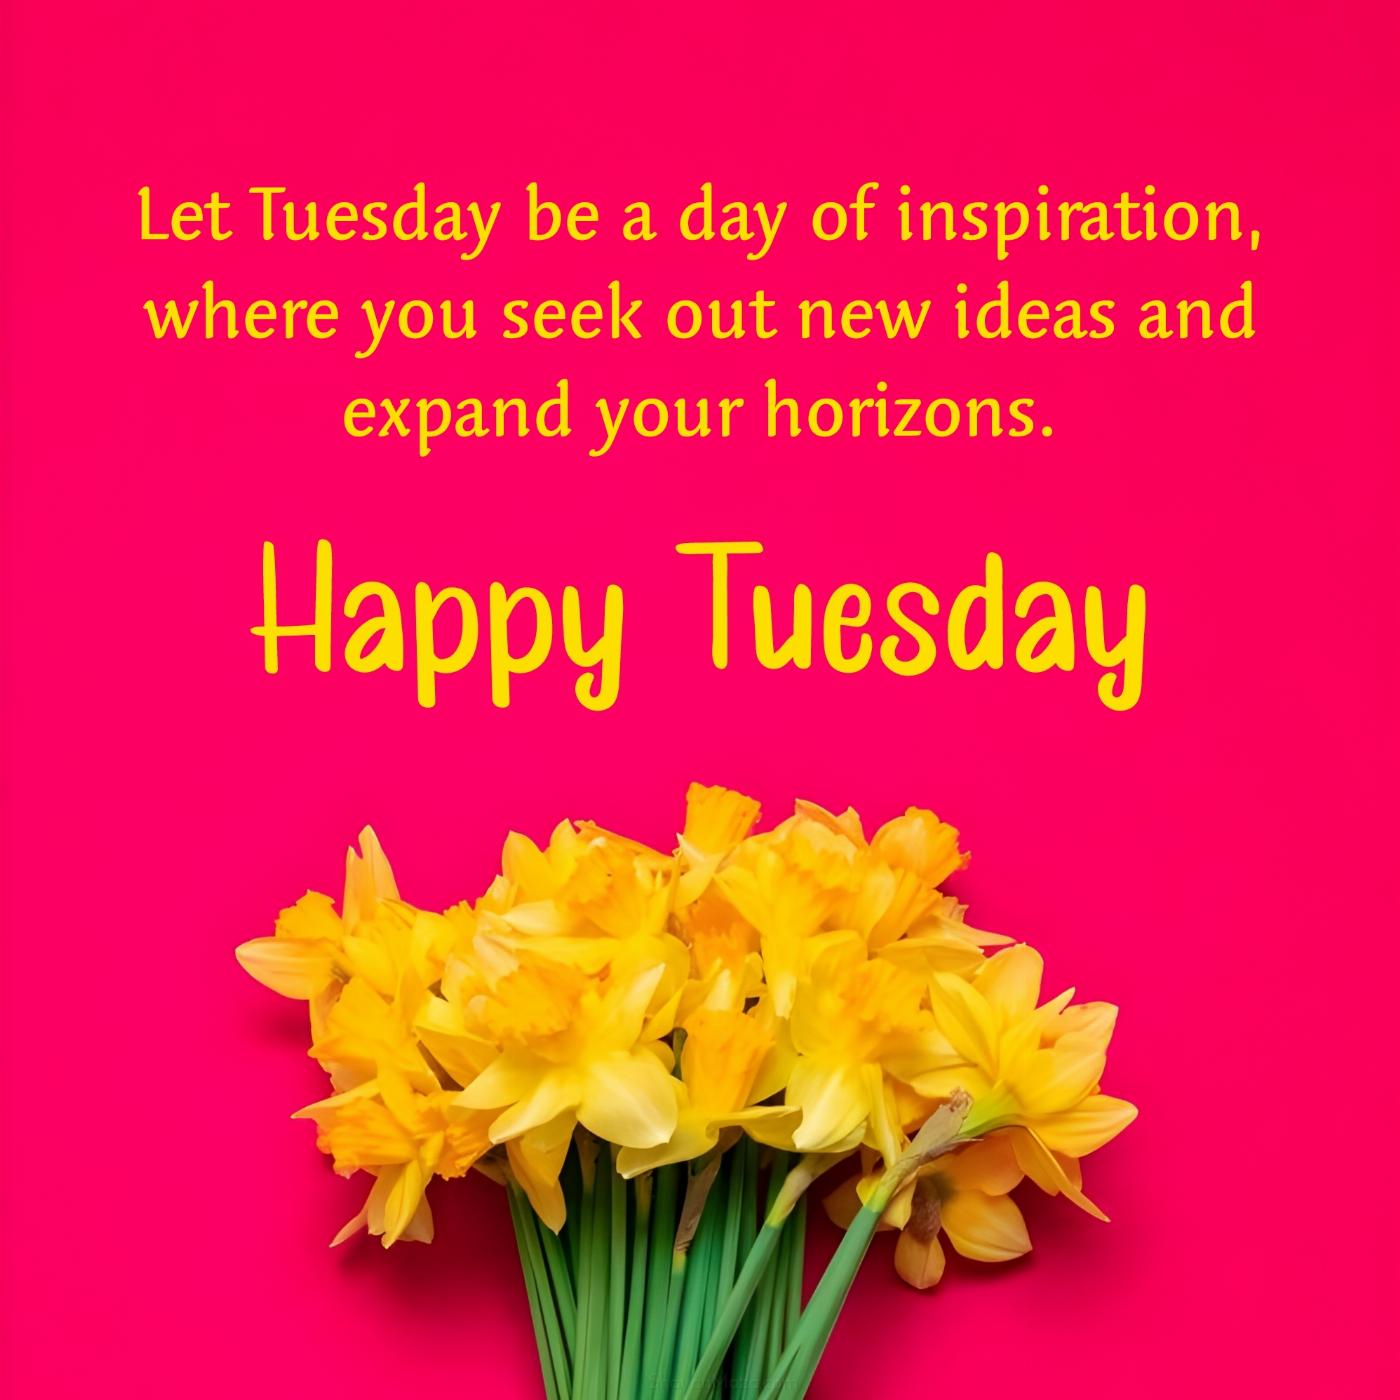 Let Tuesday be a day of inspiration where you seek out new ideas